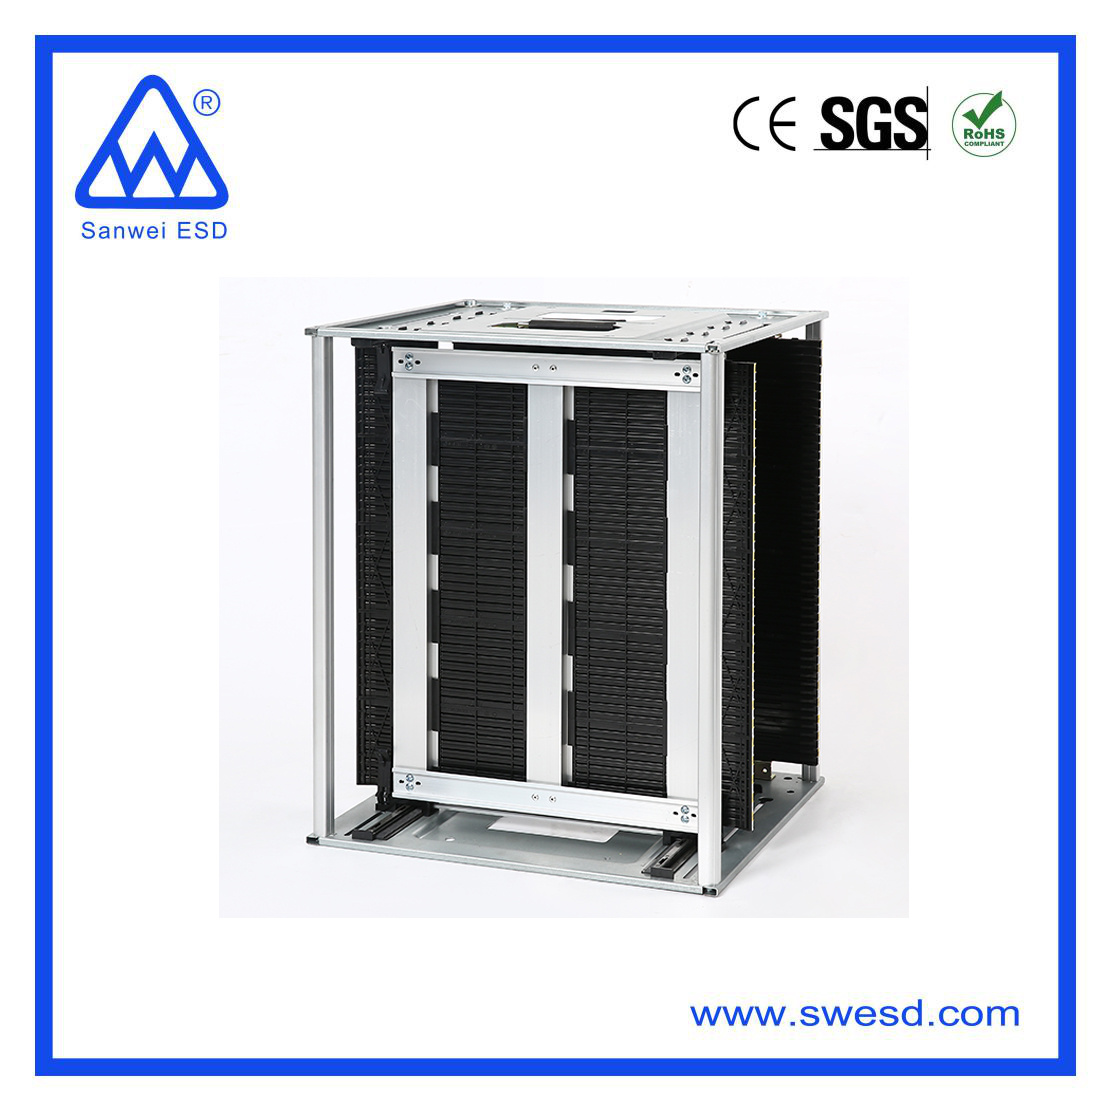 3W-9805301C（Anti-static collection rack）